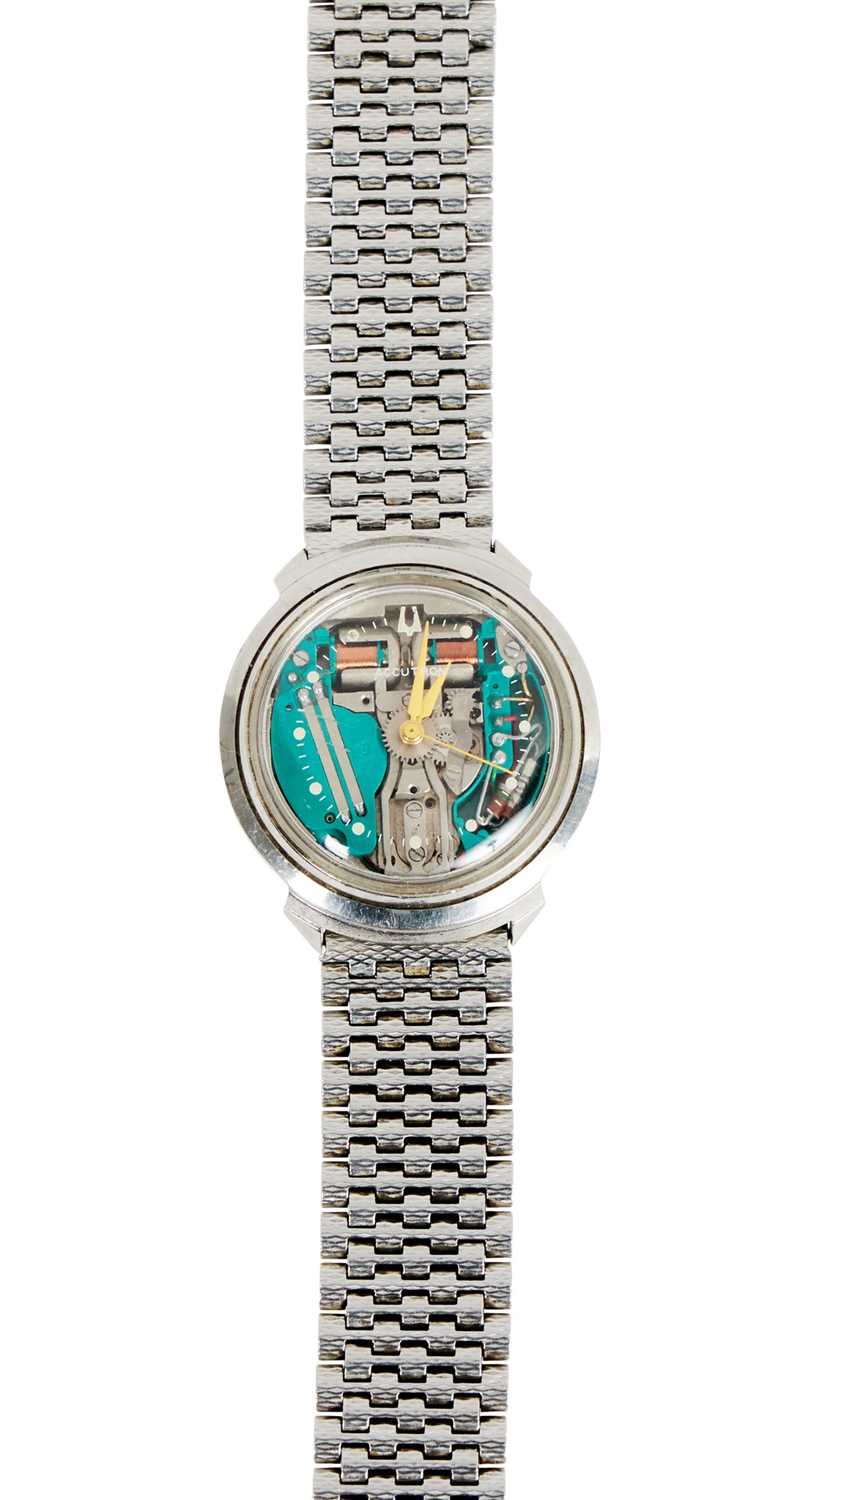 A RARE 1960'S BULOVA ACCUTRON SPACEVIEW STAINLESS STEEL WRISTWATCH